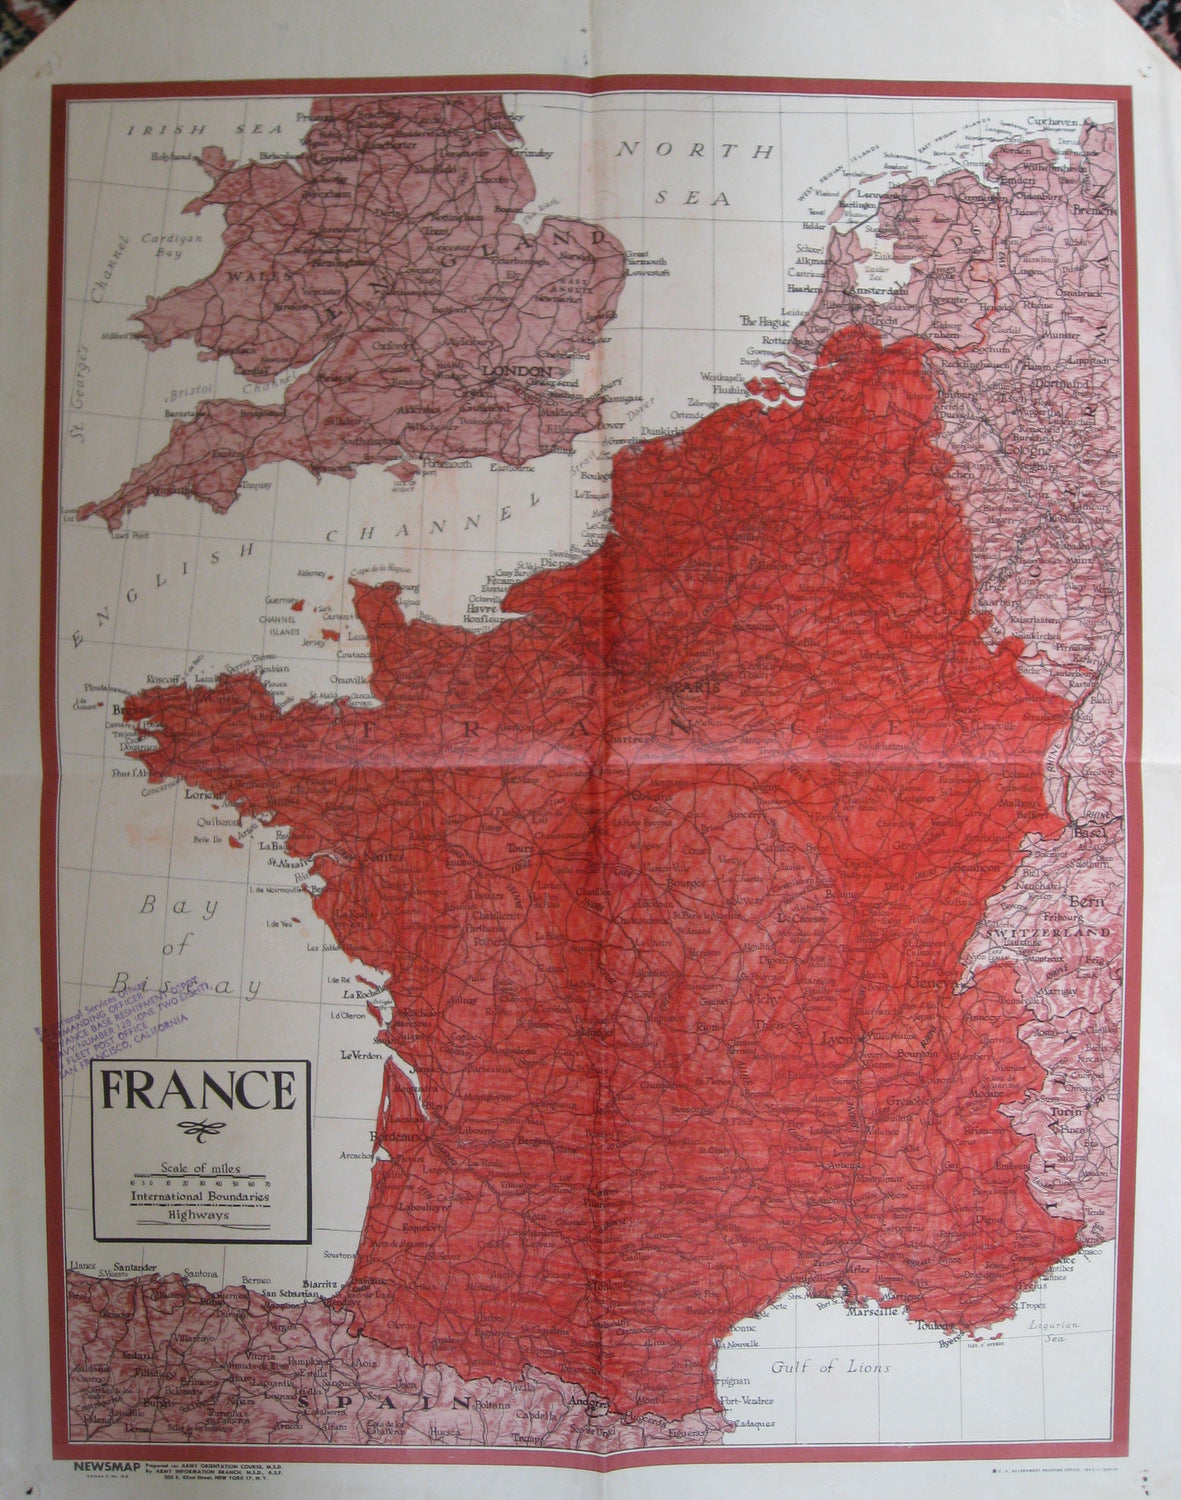 Antique-Military-Lithographed-Map-France-Newsmap-Military-World-War-II-1944-U.S.-Government-Maps-Of-Antiquity